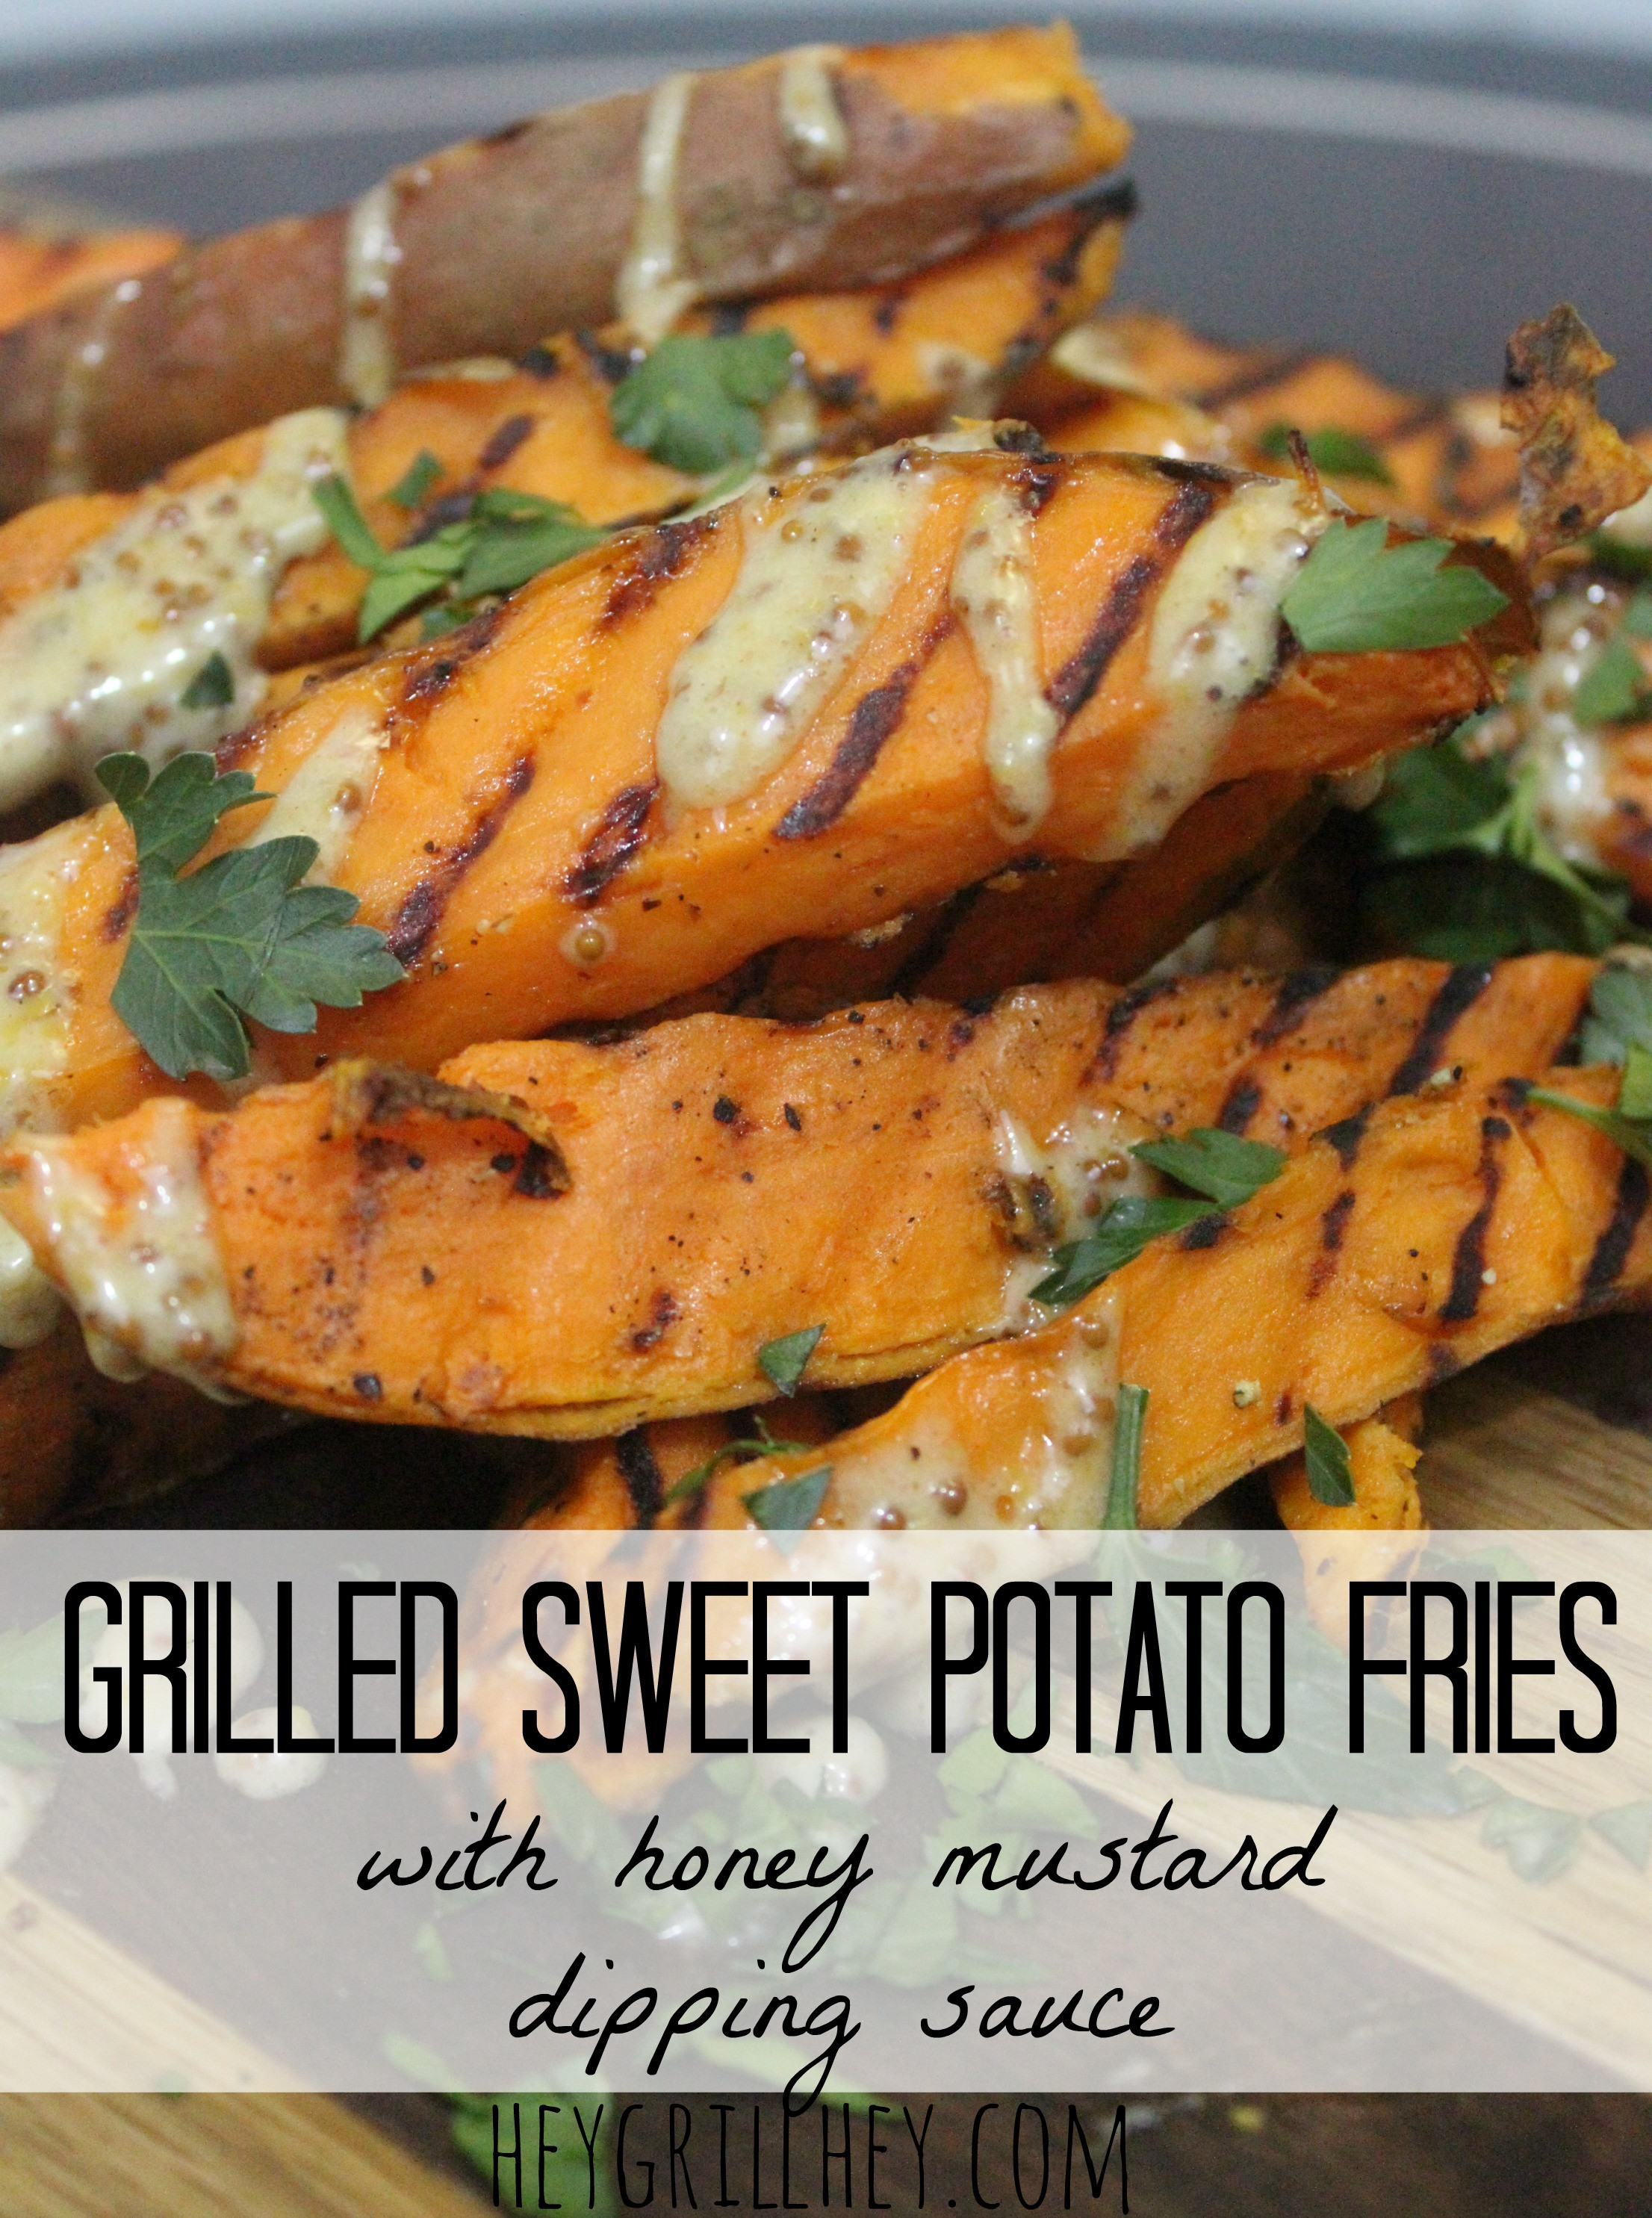 Grilled Sweet Potato Fries
 Grilled Sweet Potato Fries with Honey Mustard